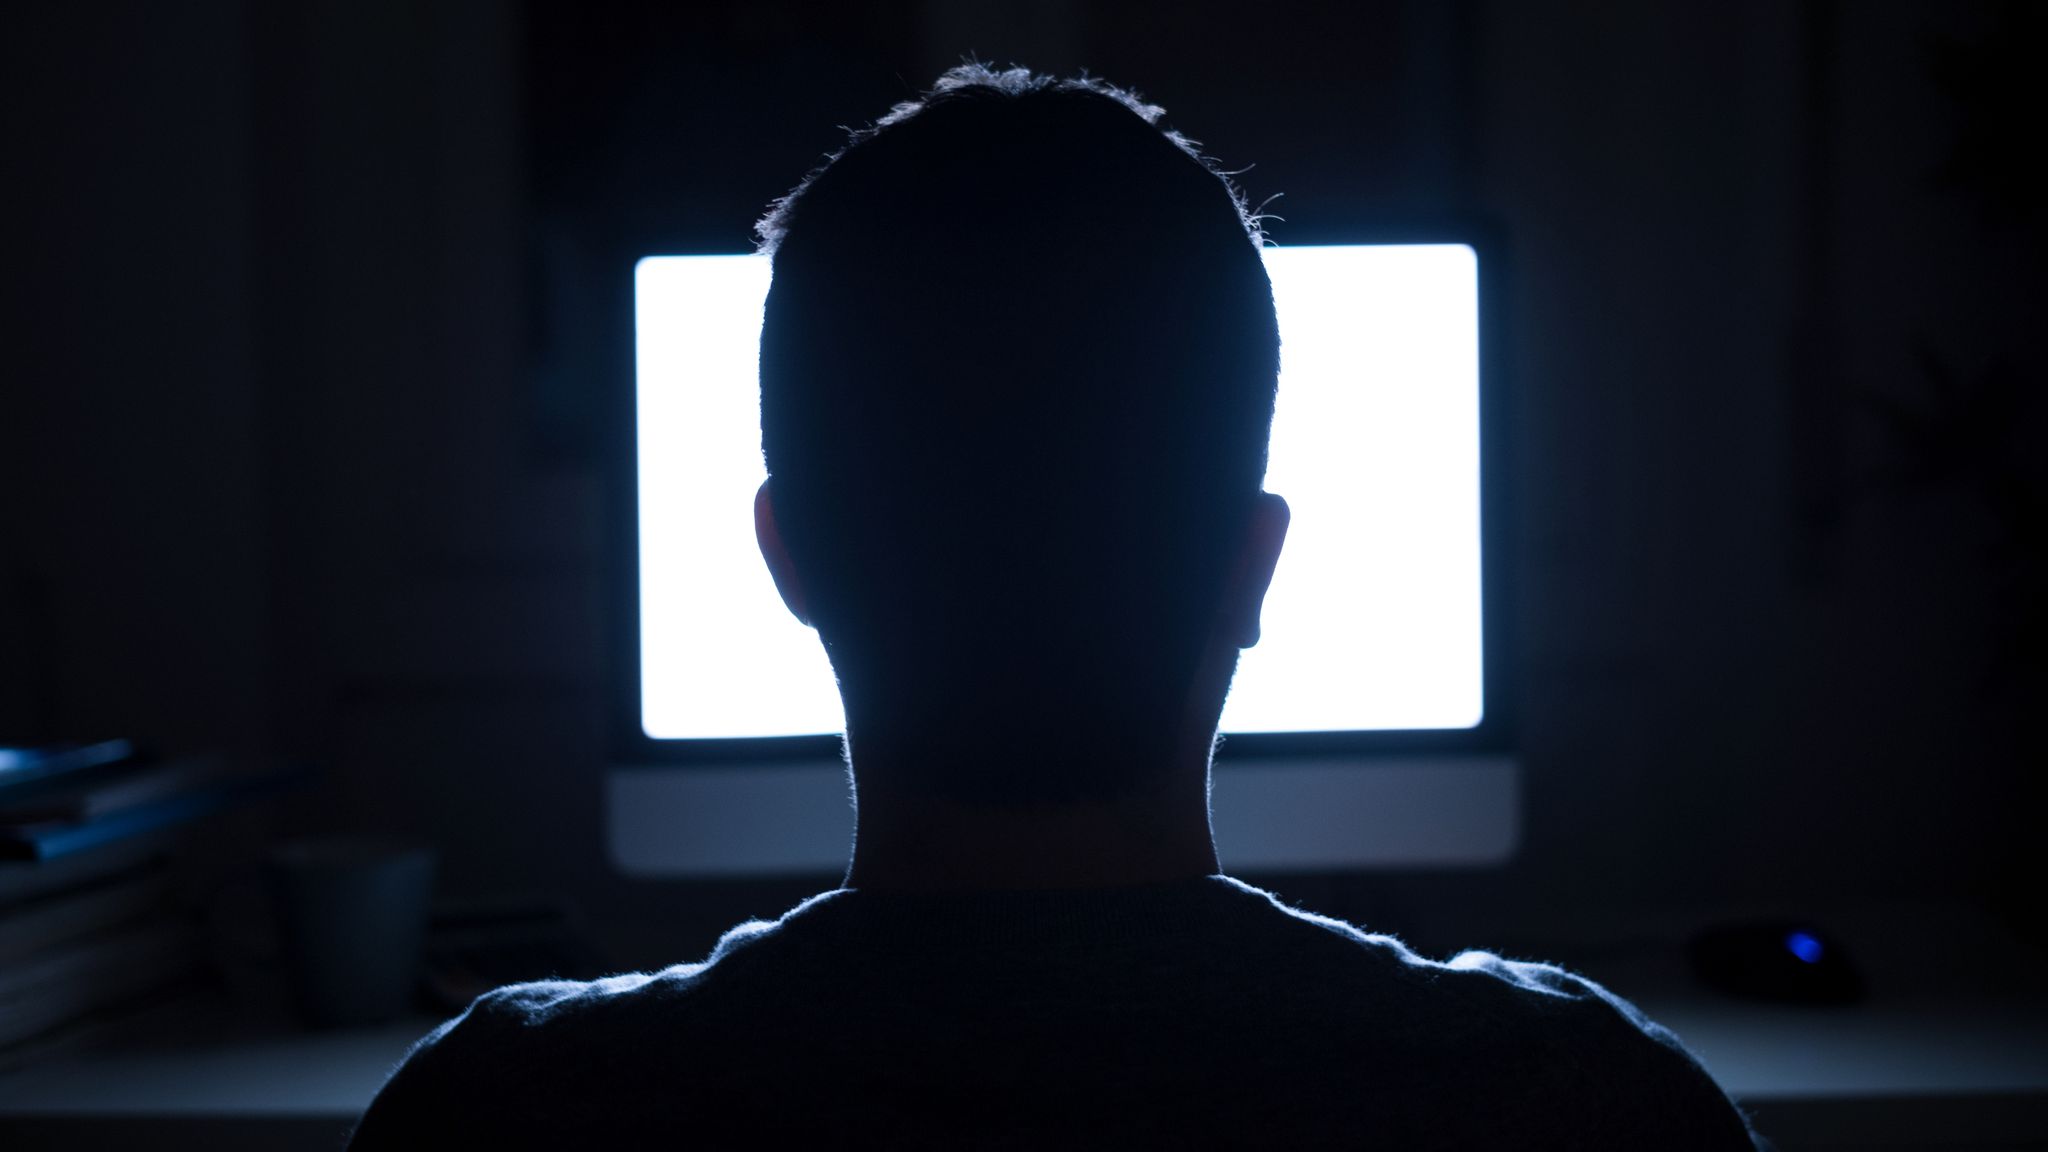 Silhouette of man&#39;s head in front of computer monitor light at night